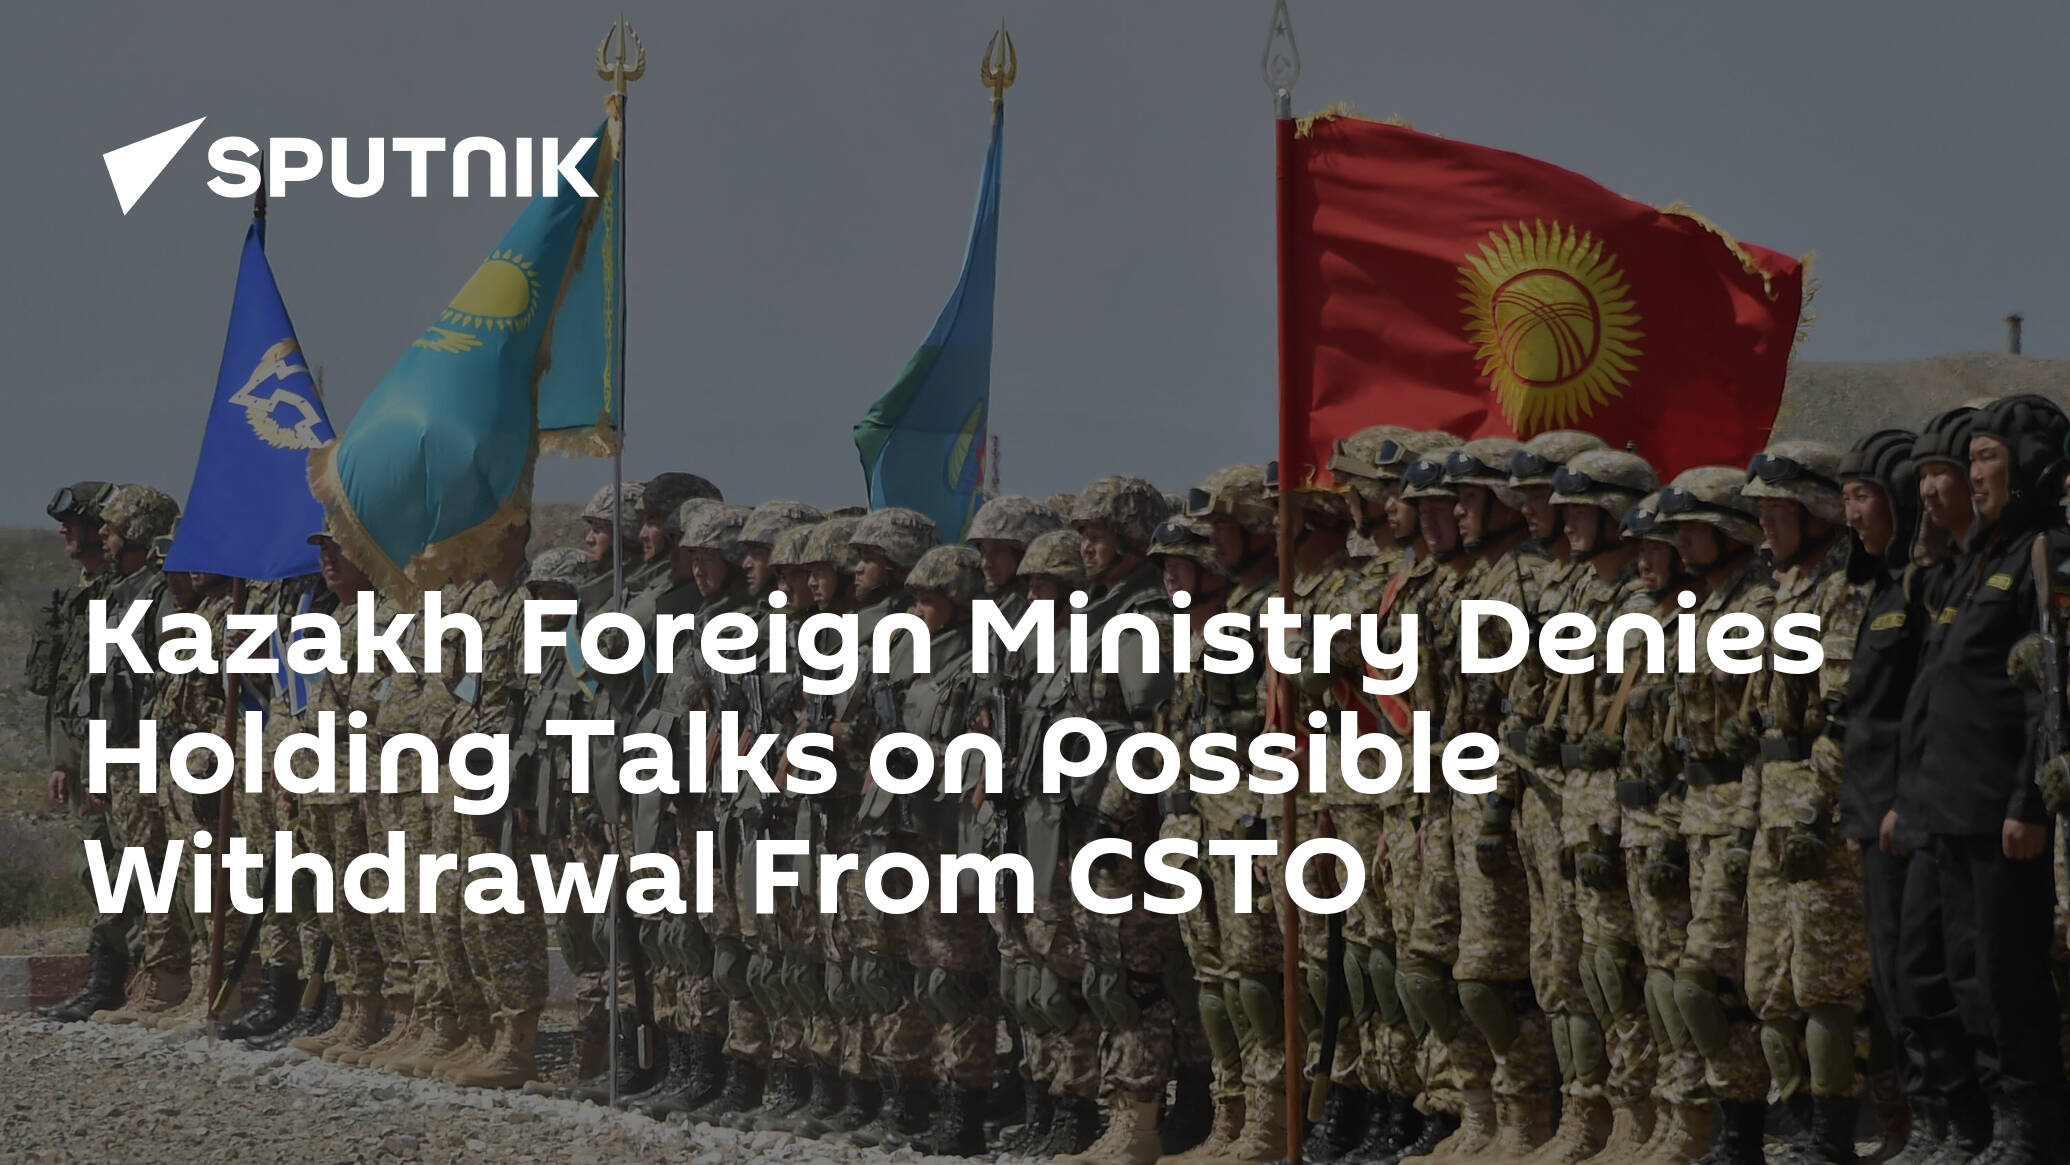 Kazakh Foreign Ministry Denies Holding Talks on Possible Withdrawal From CSTO